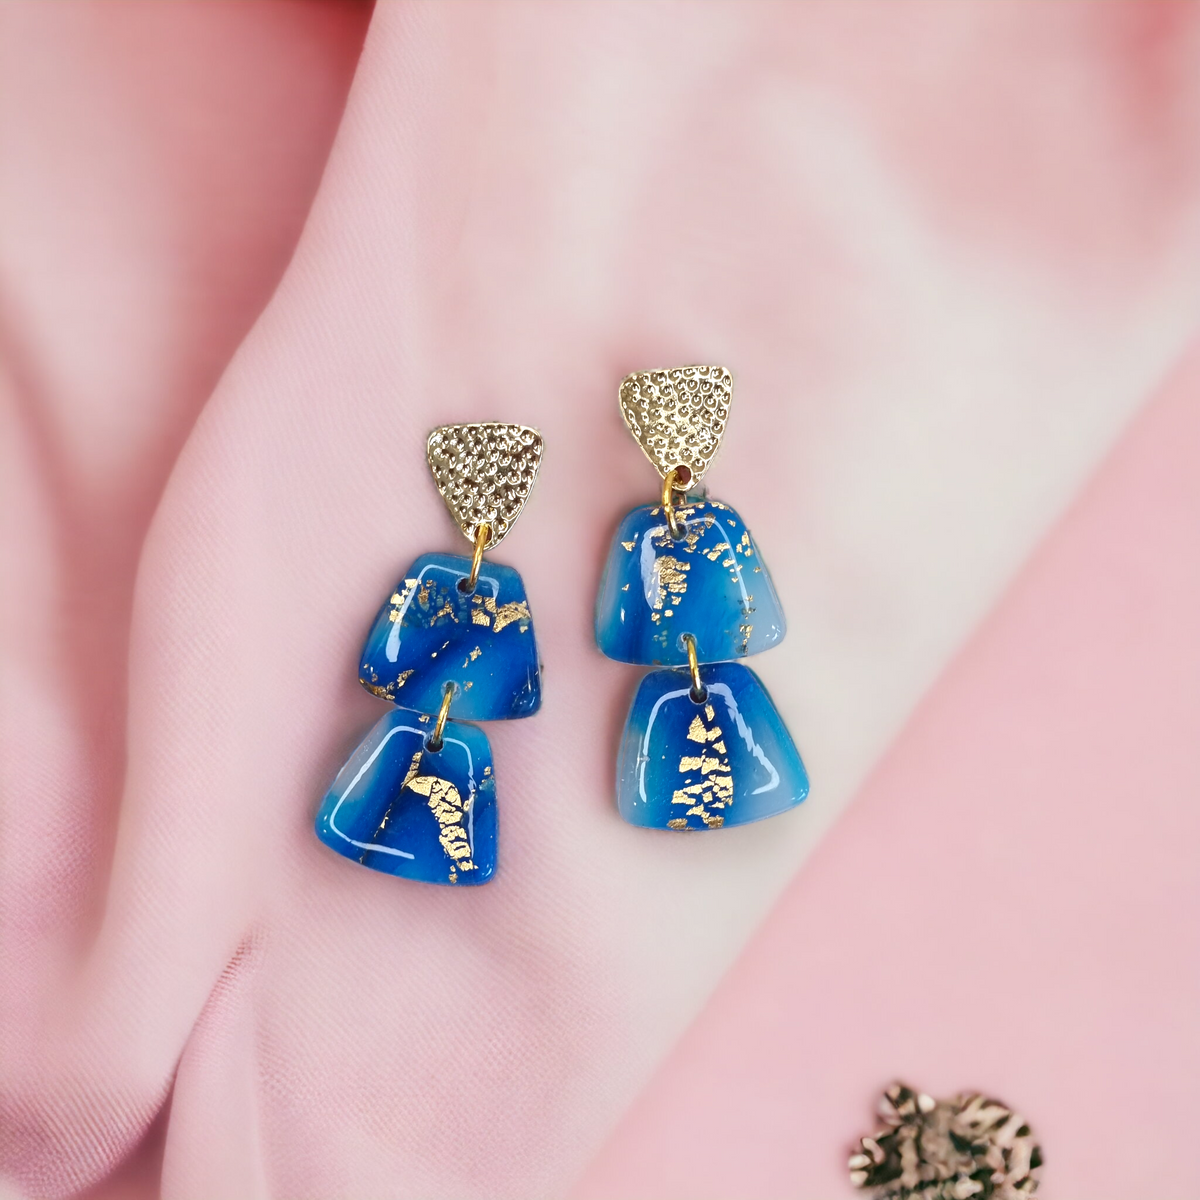 Statement Blue and Gold Crystal Effect Earrings